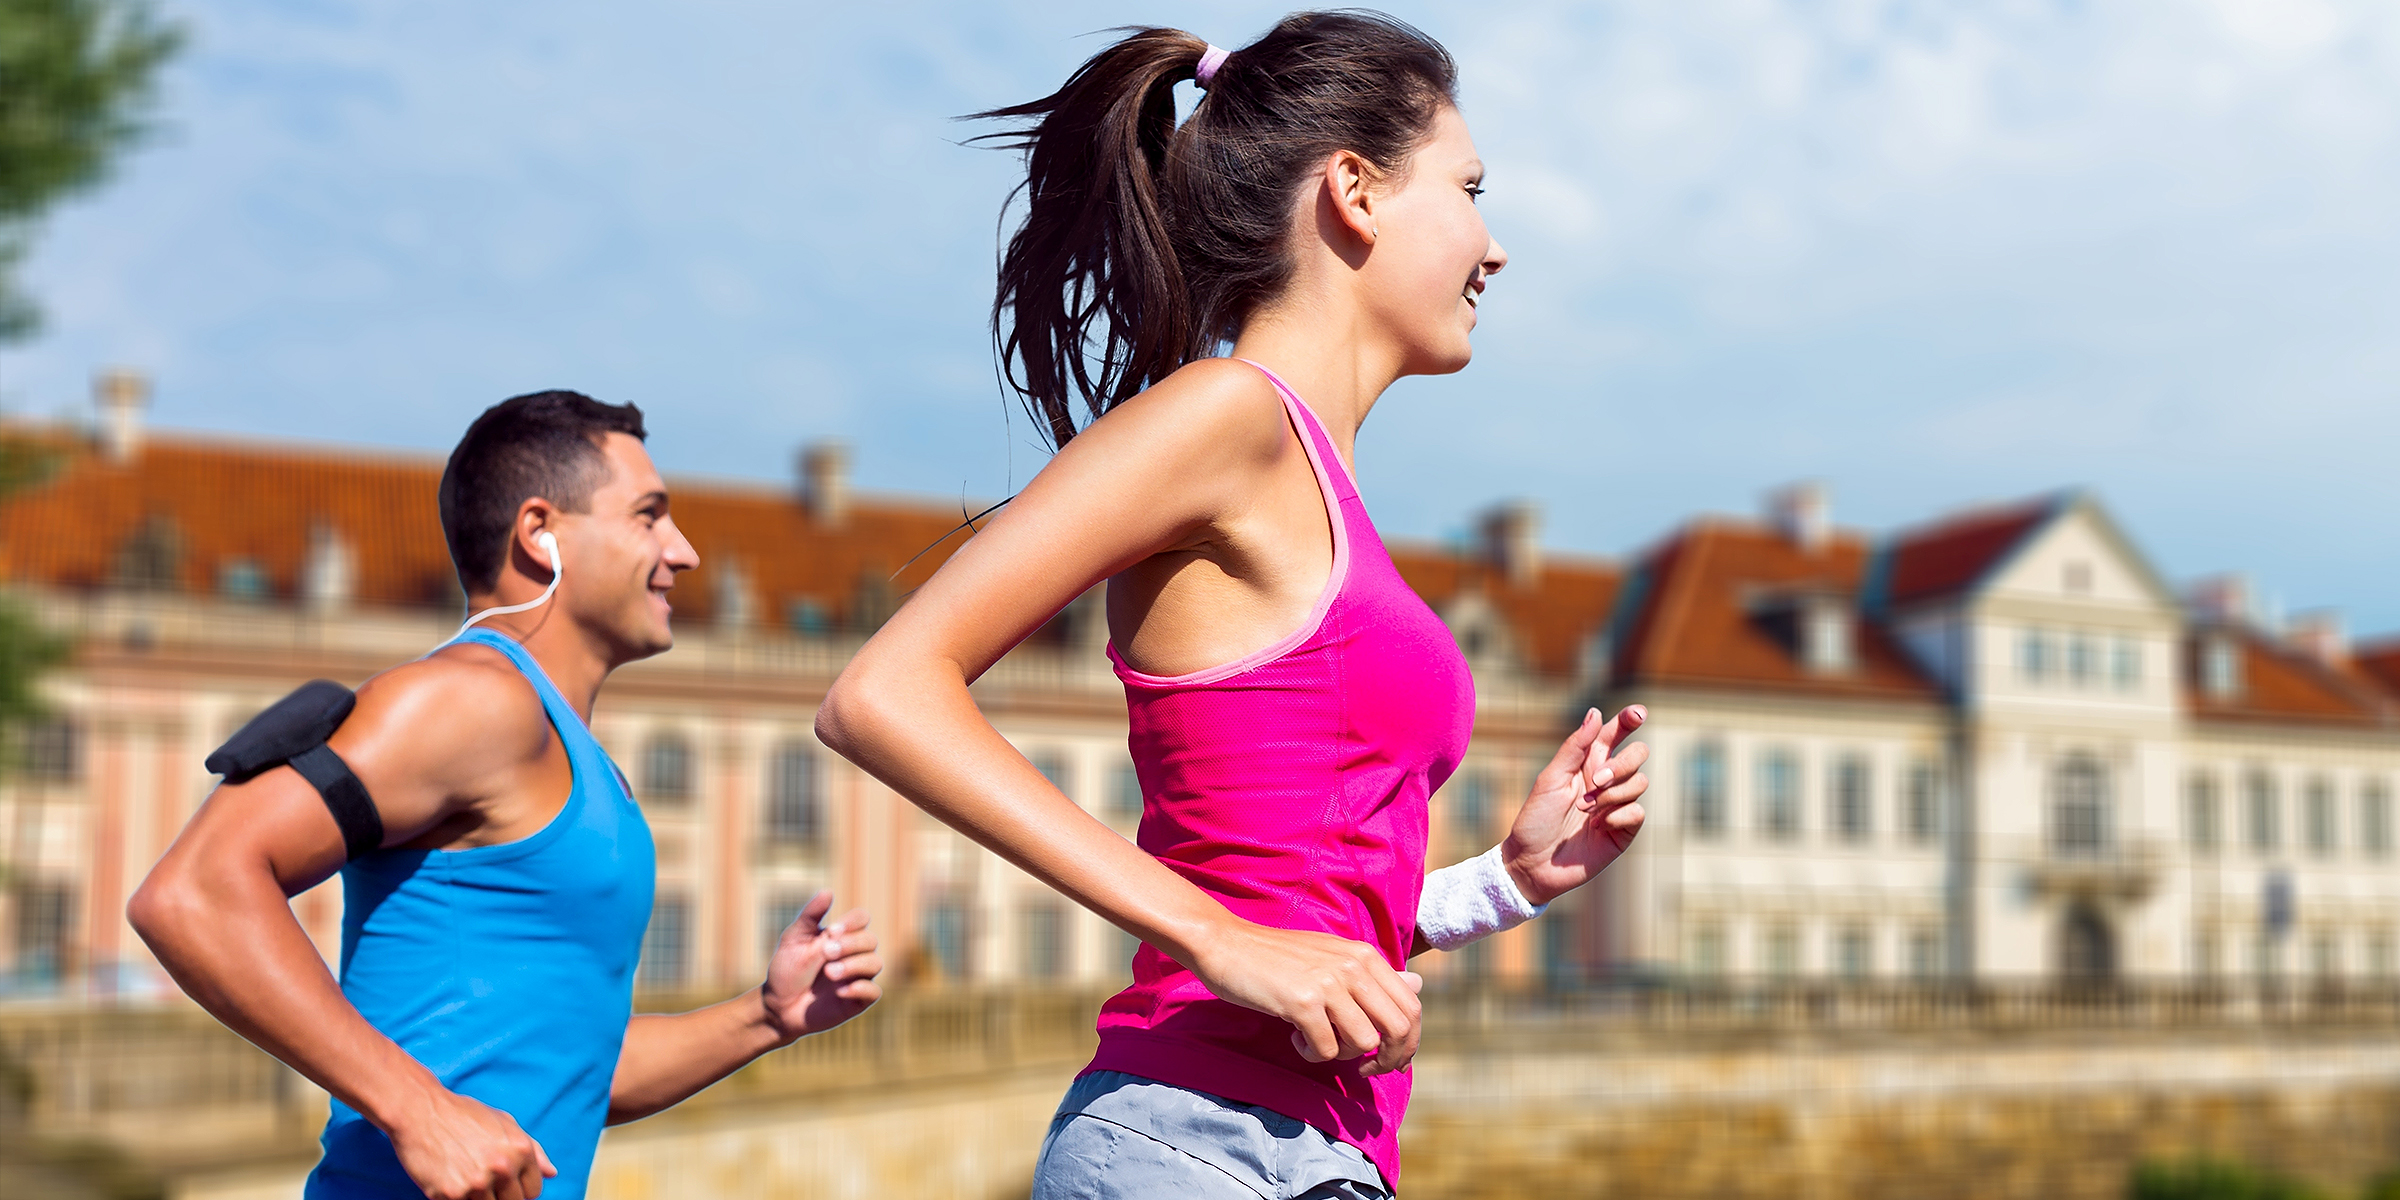 Two people run outdoors | Source: Shutterstock